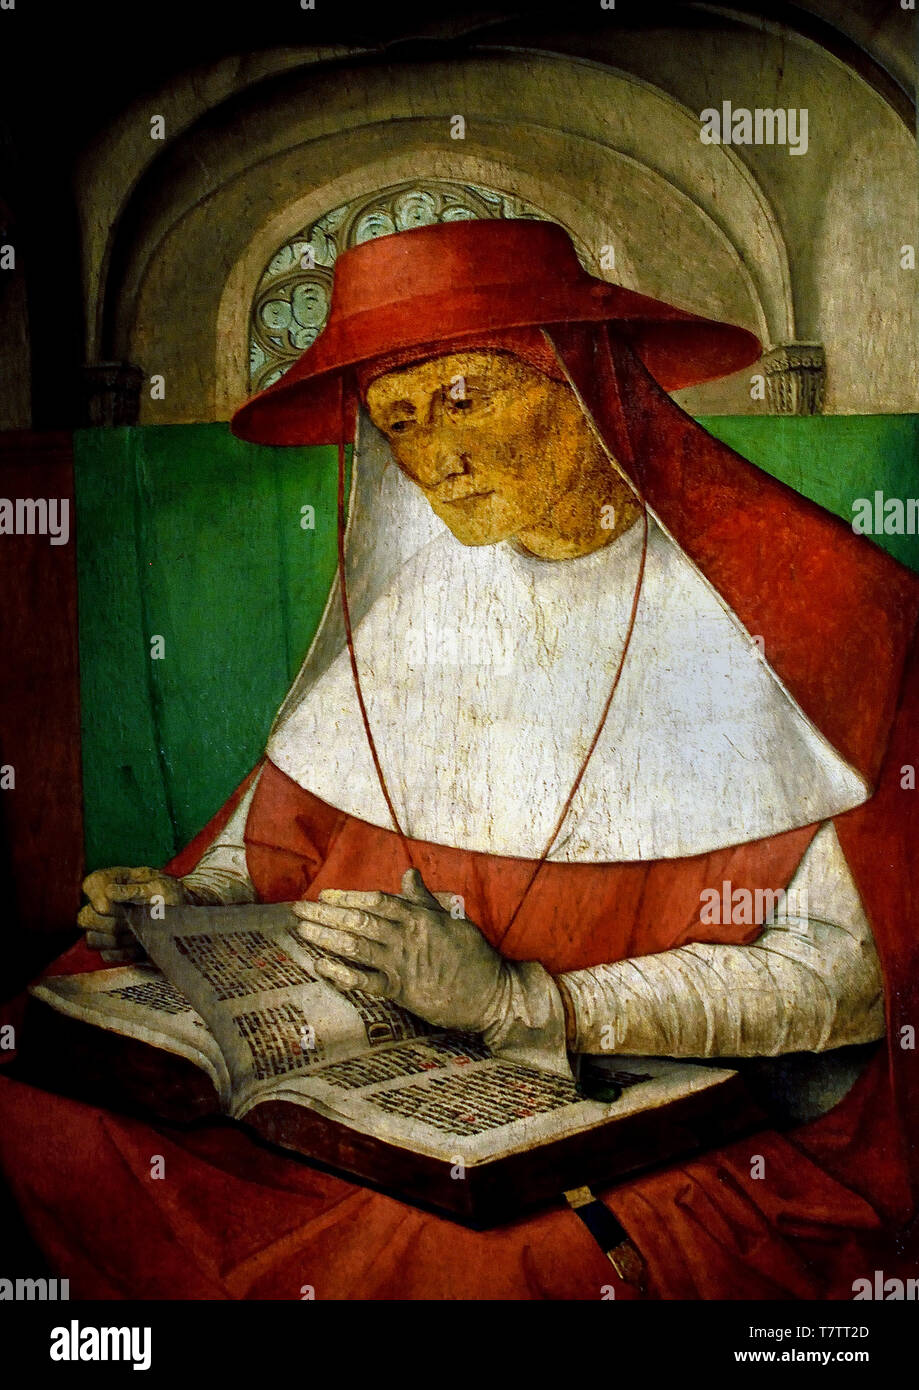 Holy Hieronymus (347-420) by Justus van Gent 1435 - 1500 Antwerp South Netherlandish Flemish Belgian, ( Best known for his Latin translation of the Bible, the Vulgate (391–405), Jerome also was a prolific writer of letters, biblical commentaries, sermons, and theological tracts, as well as a translator of many Greek works into Latin. ) Stock Photo